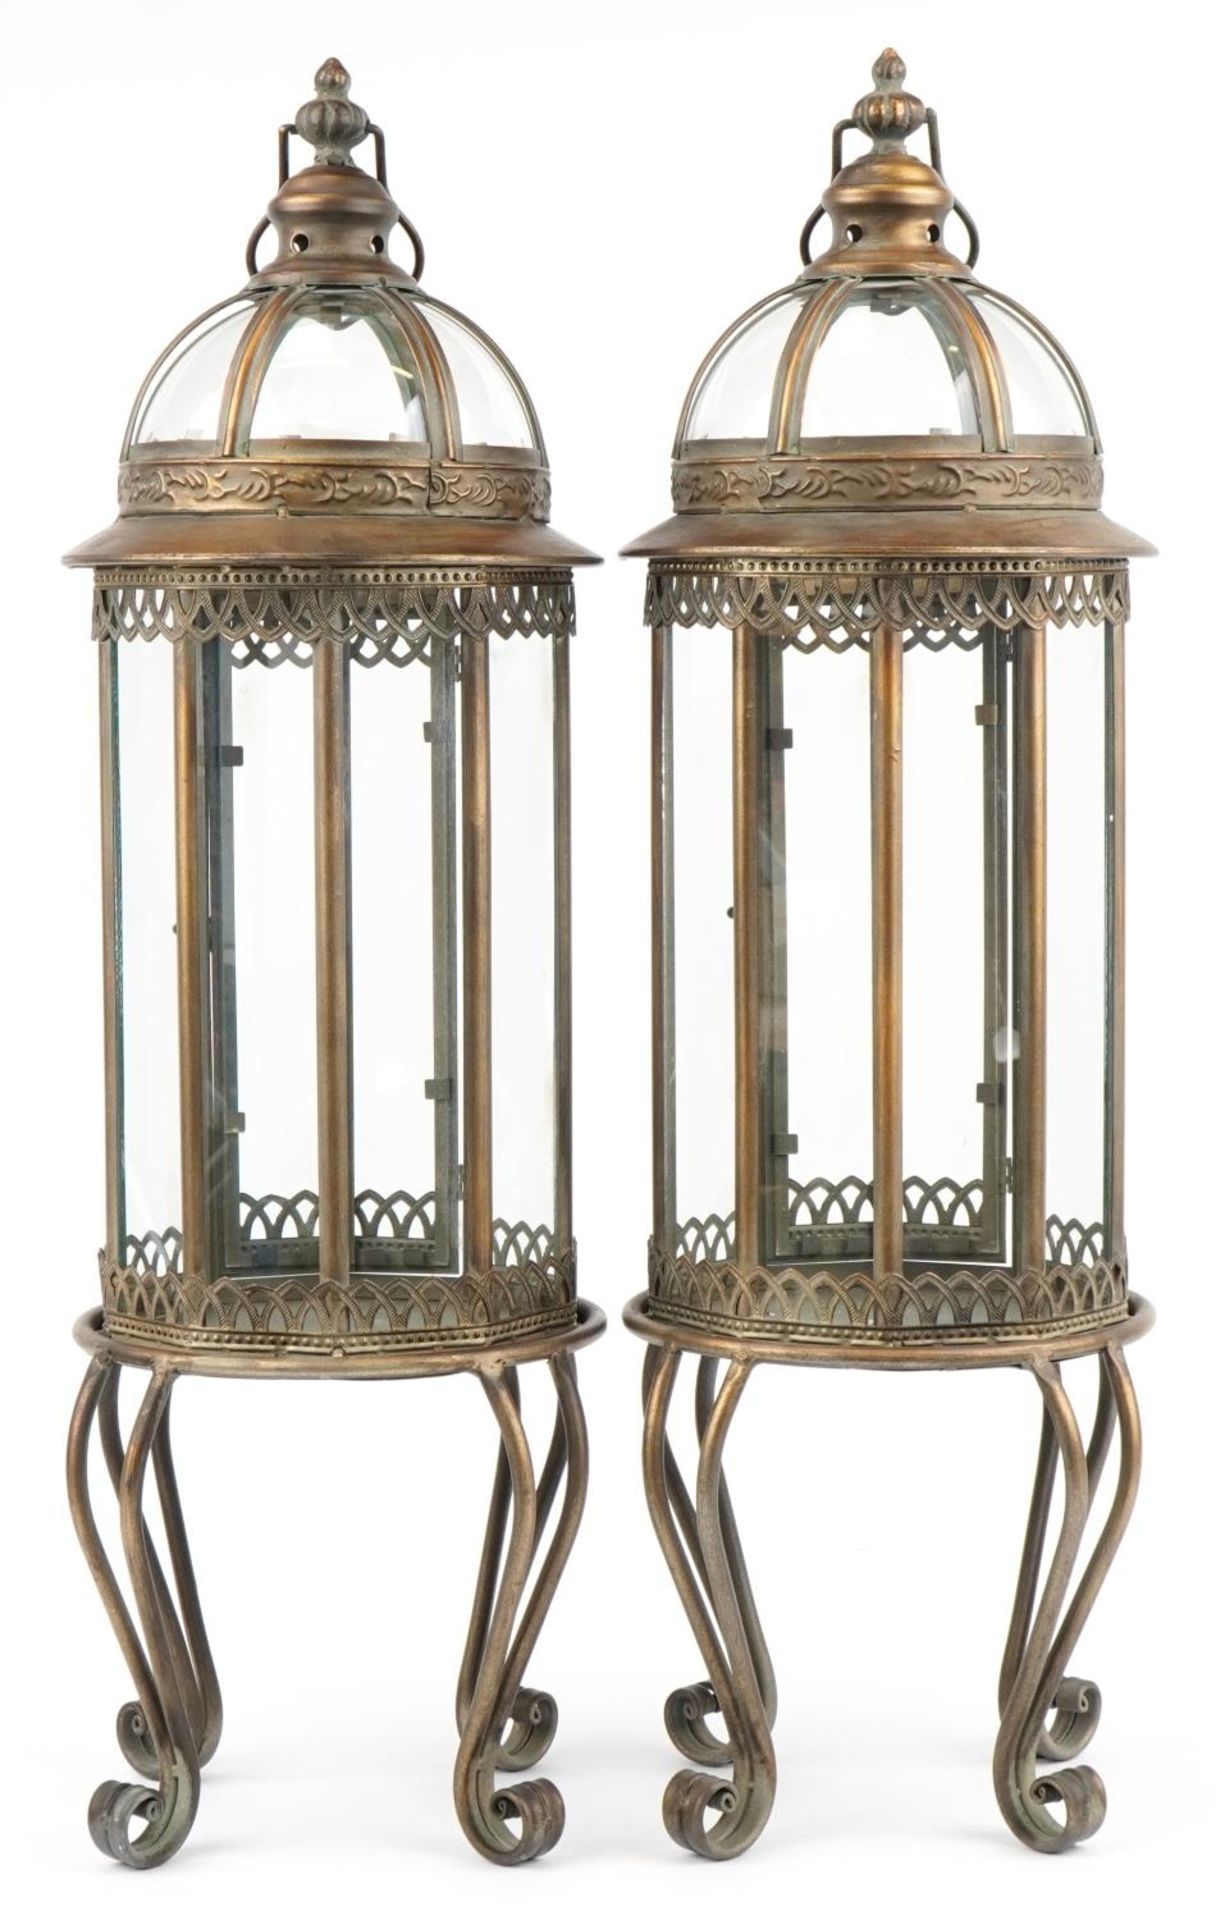 Pair of partially gilt and glazed lantern design candle holders, 82cm high